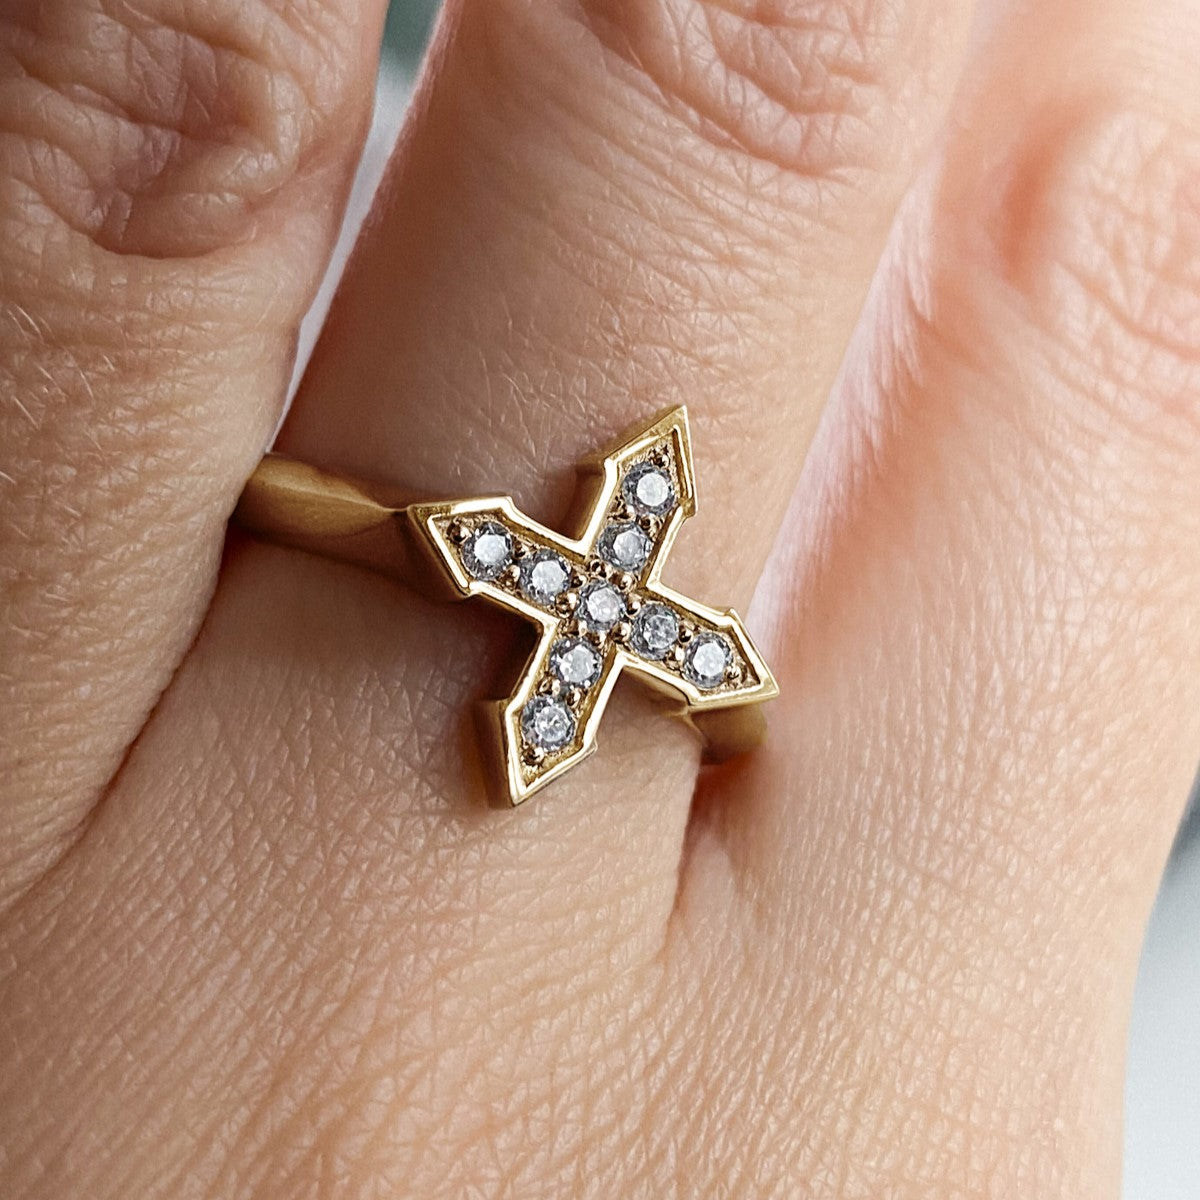 RING STAR "GLOW" WITH MOISSANITE / SOLID GOLD